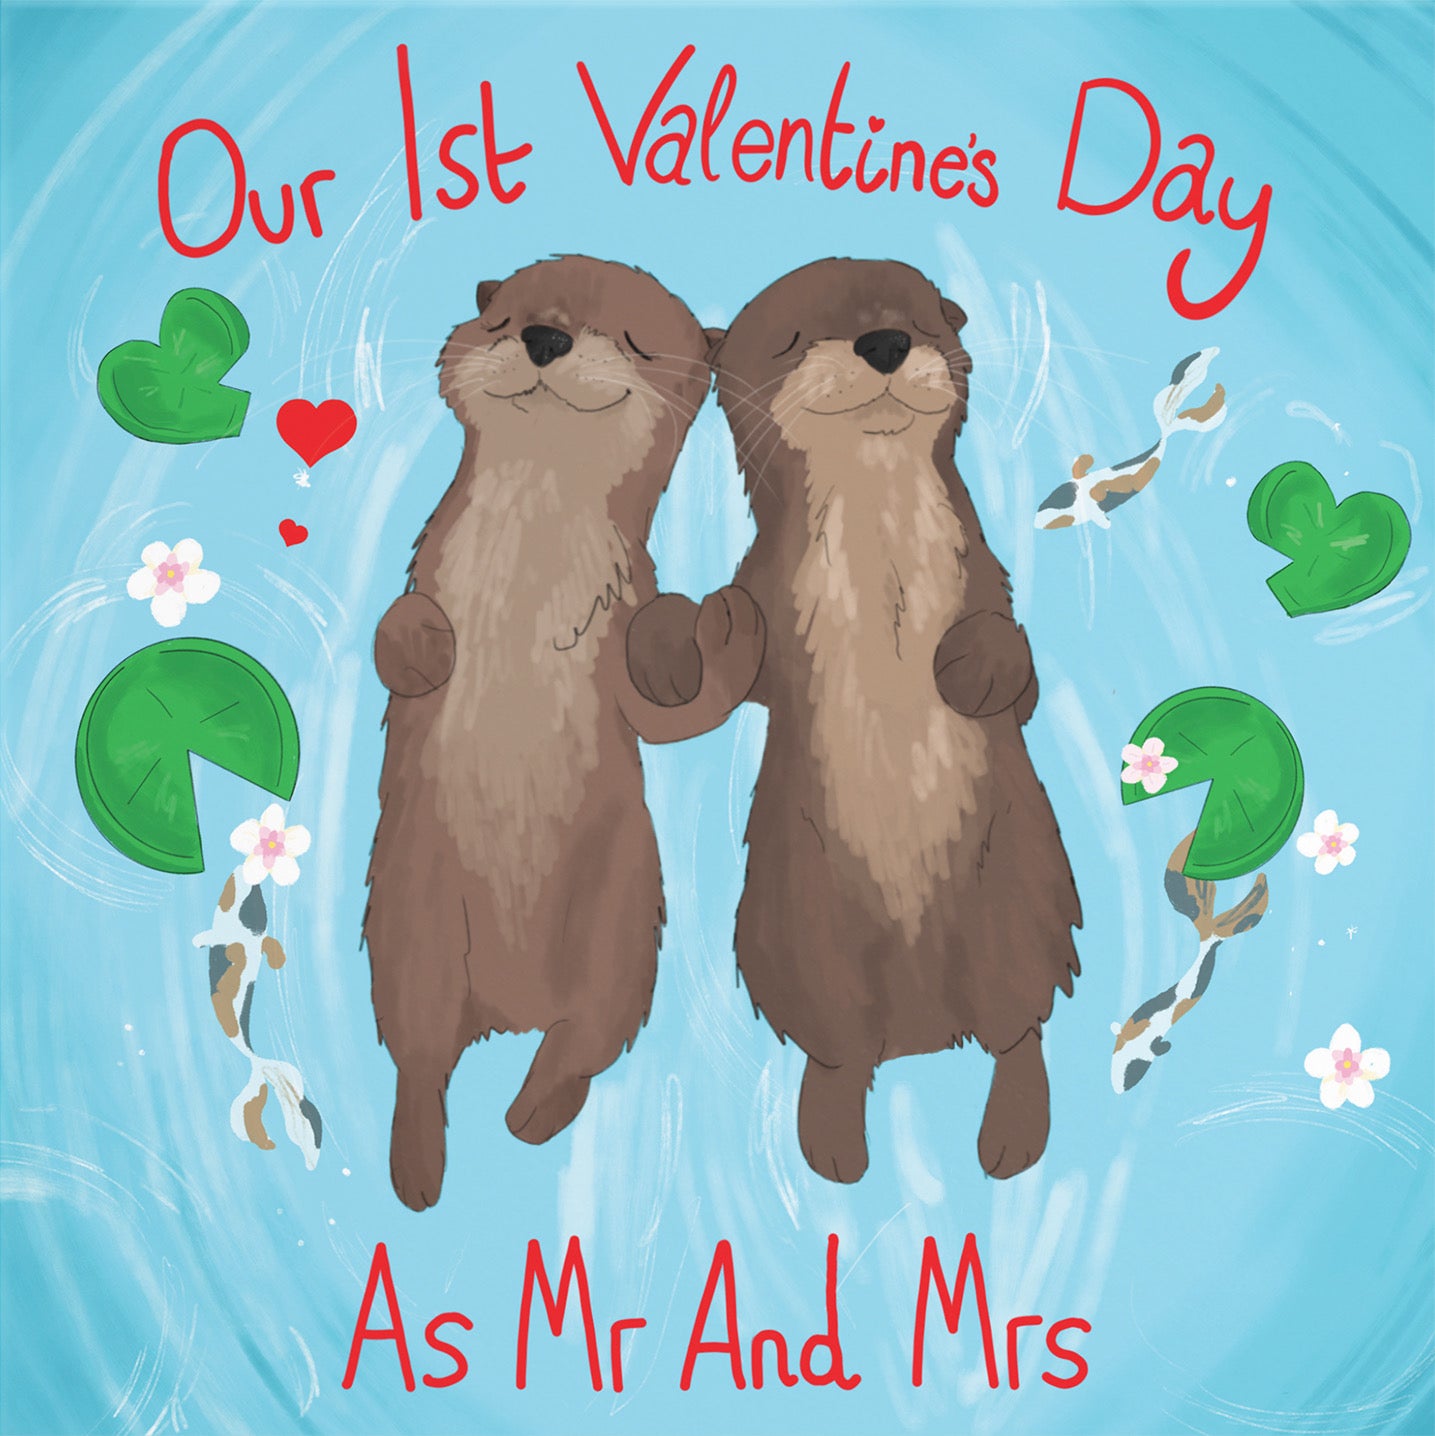 Otters 1st Married Valentine's Day Card Cute Animals - Default Title (B09R6L3VN8)